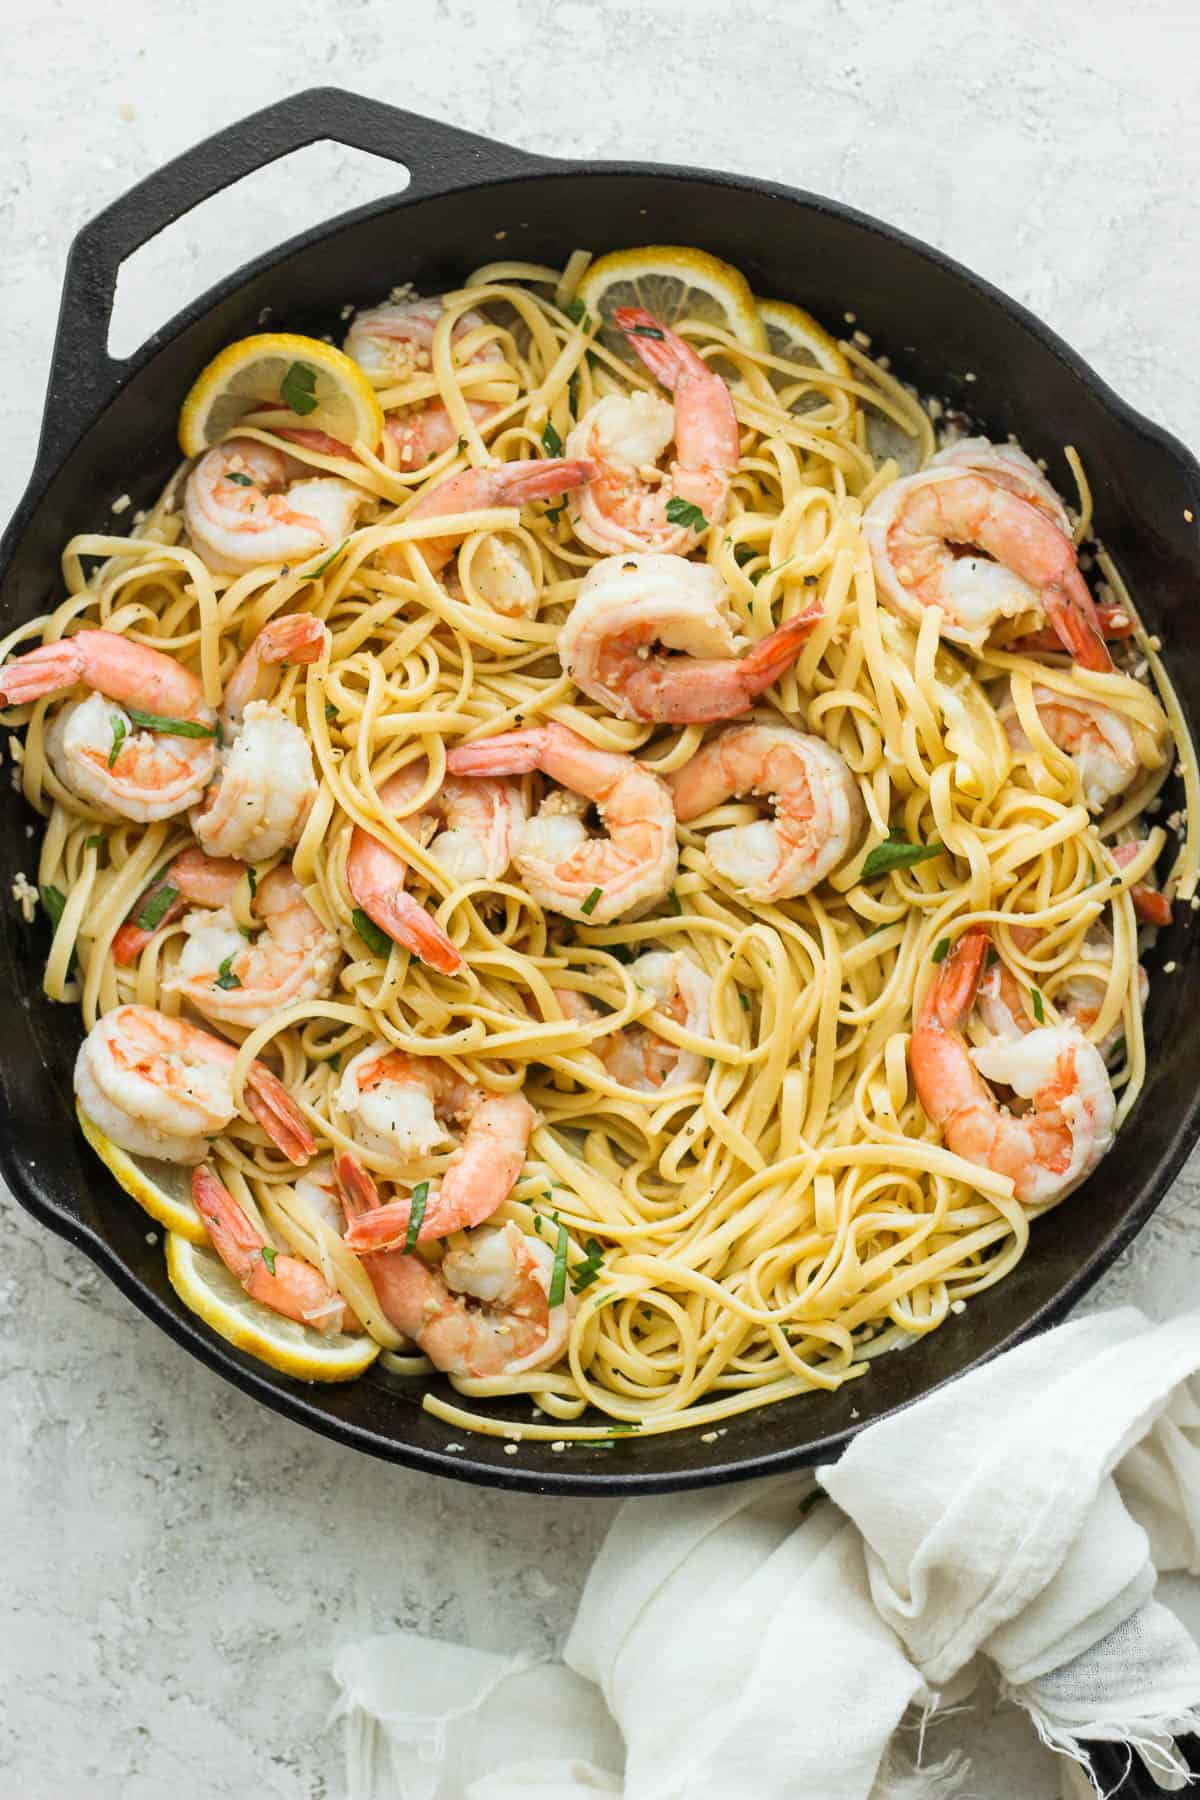 Cooked noodles added to the pan and tossed with the shrimp and sauce.